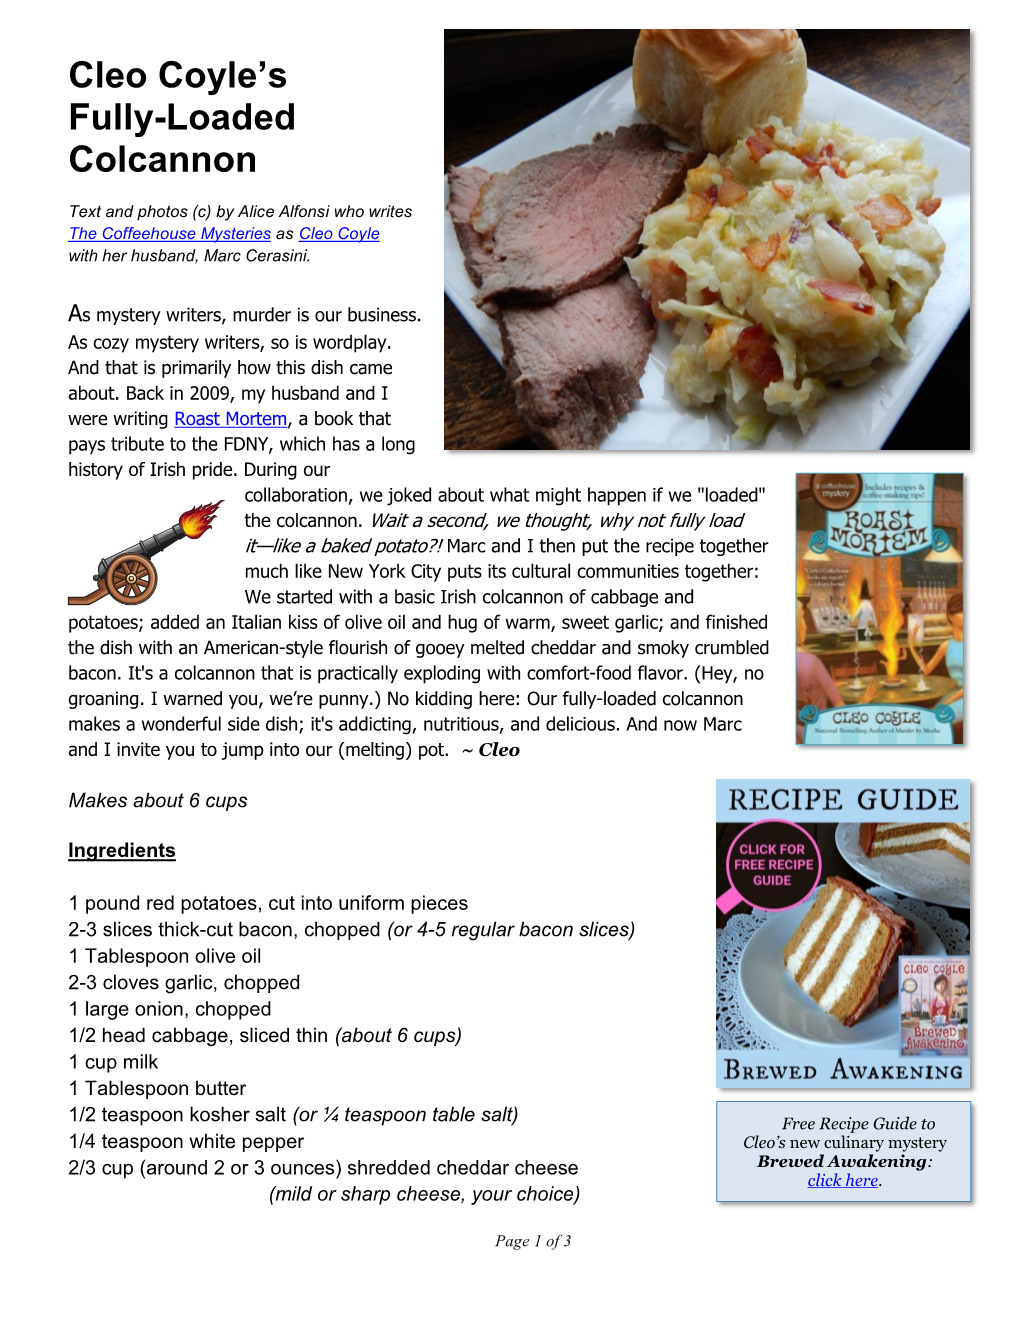 Cleo Coyle's Fully Loaded Colcannon